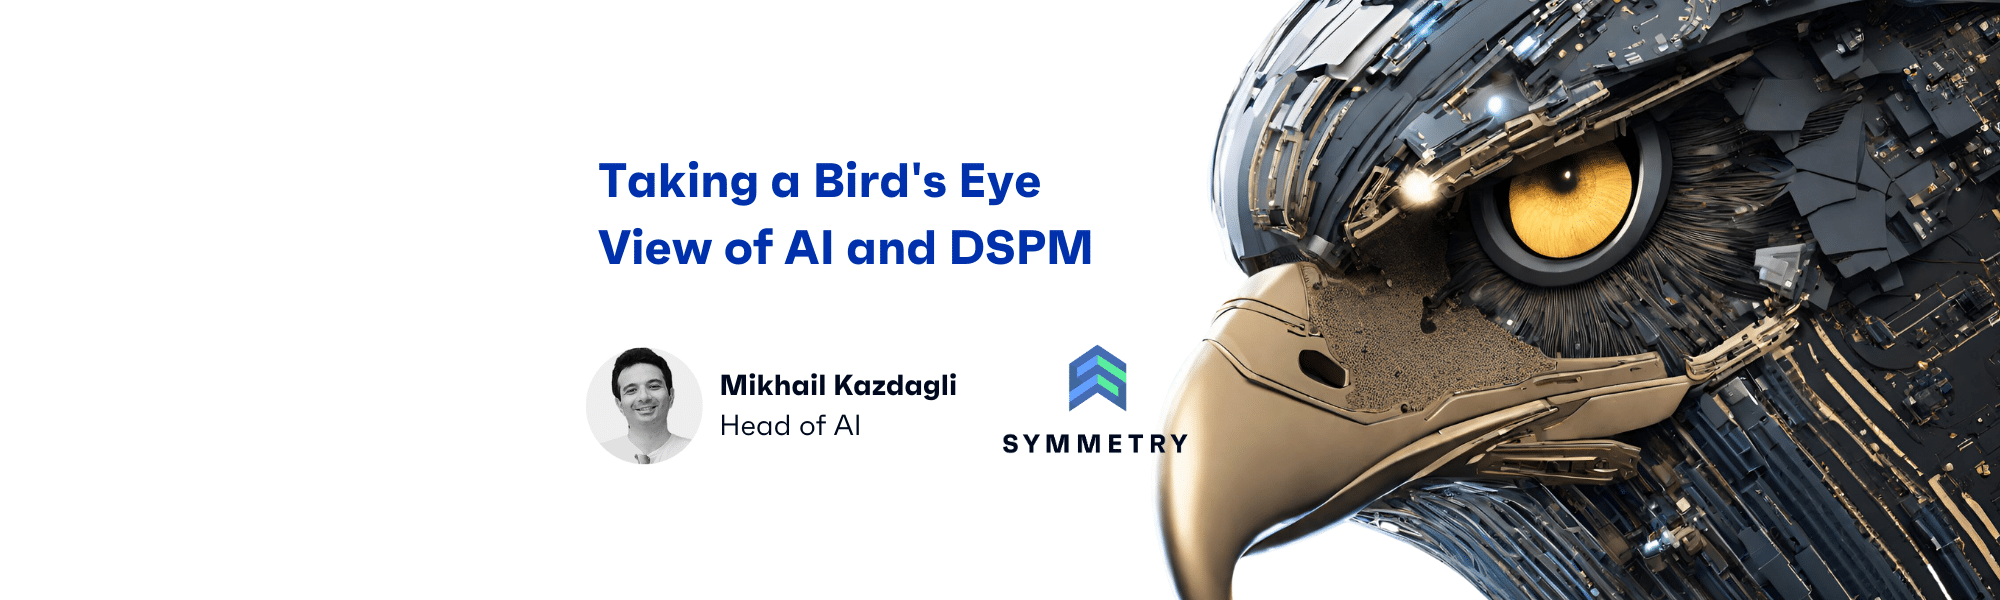 taking-a-birds-eye-view-of-ai-and-dspm